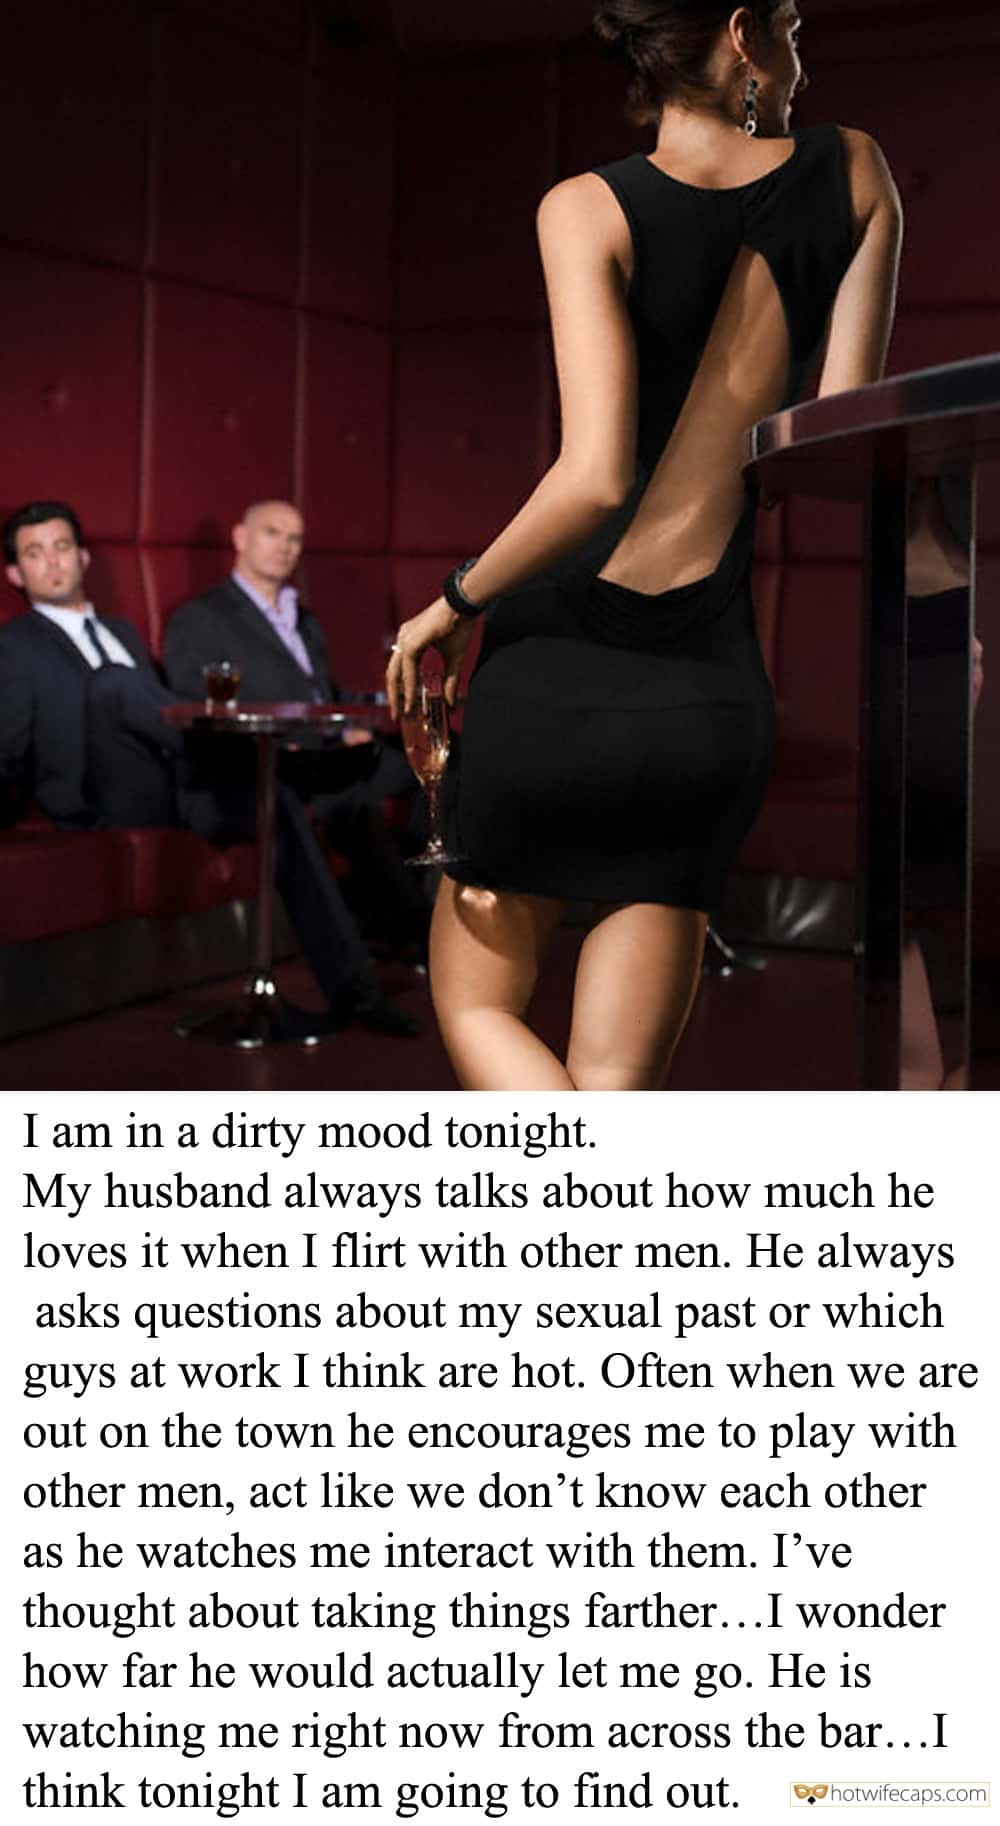 Cuckold Stories, Sexy Memes Hotwife Caption №149025 Thrill of flirting with other men in front of husband